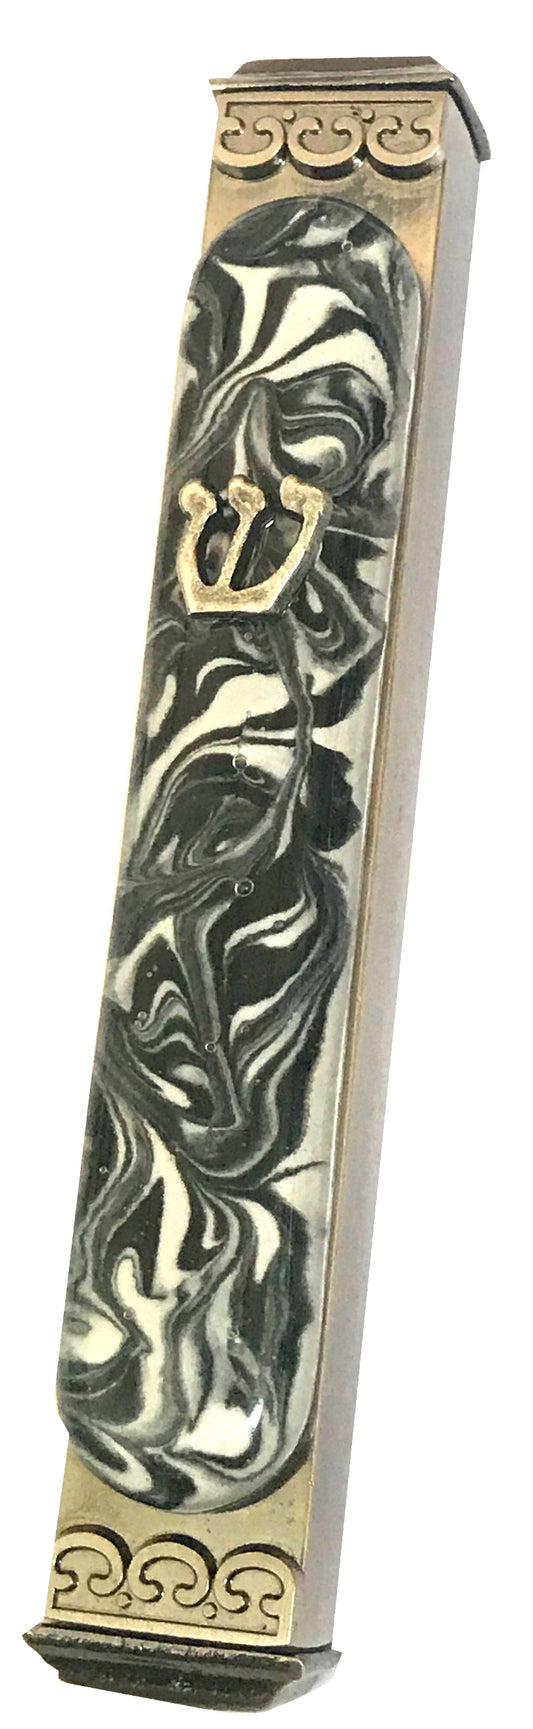 Marbled Black and White Mezuzah